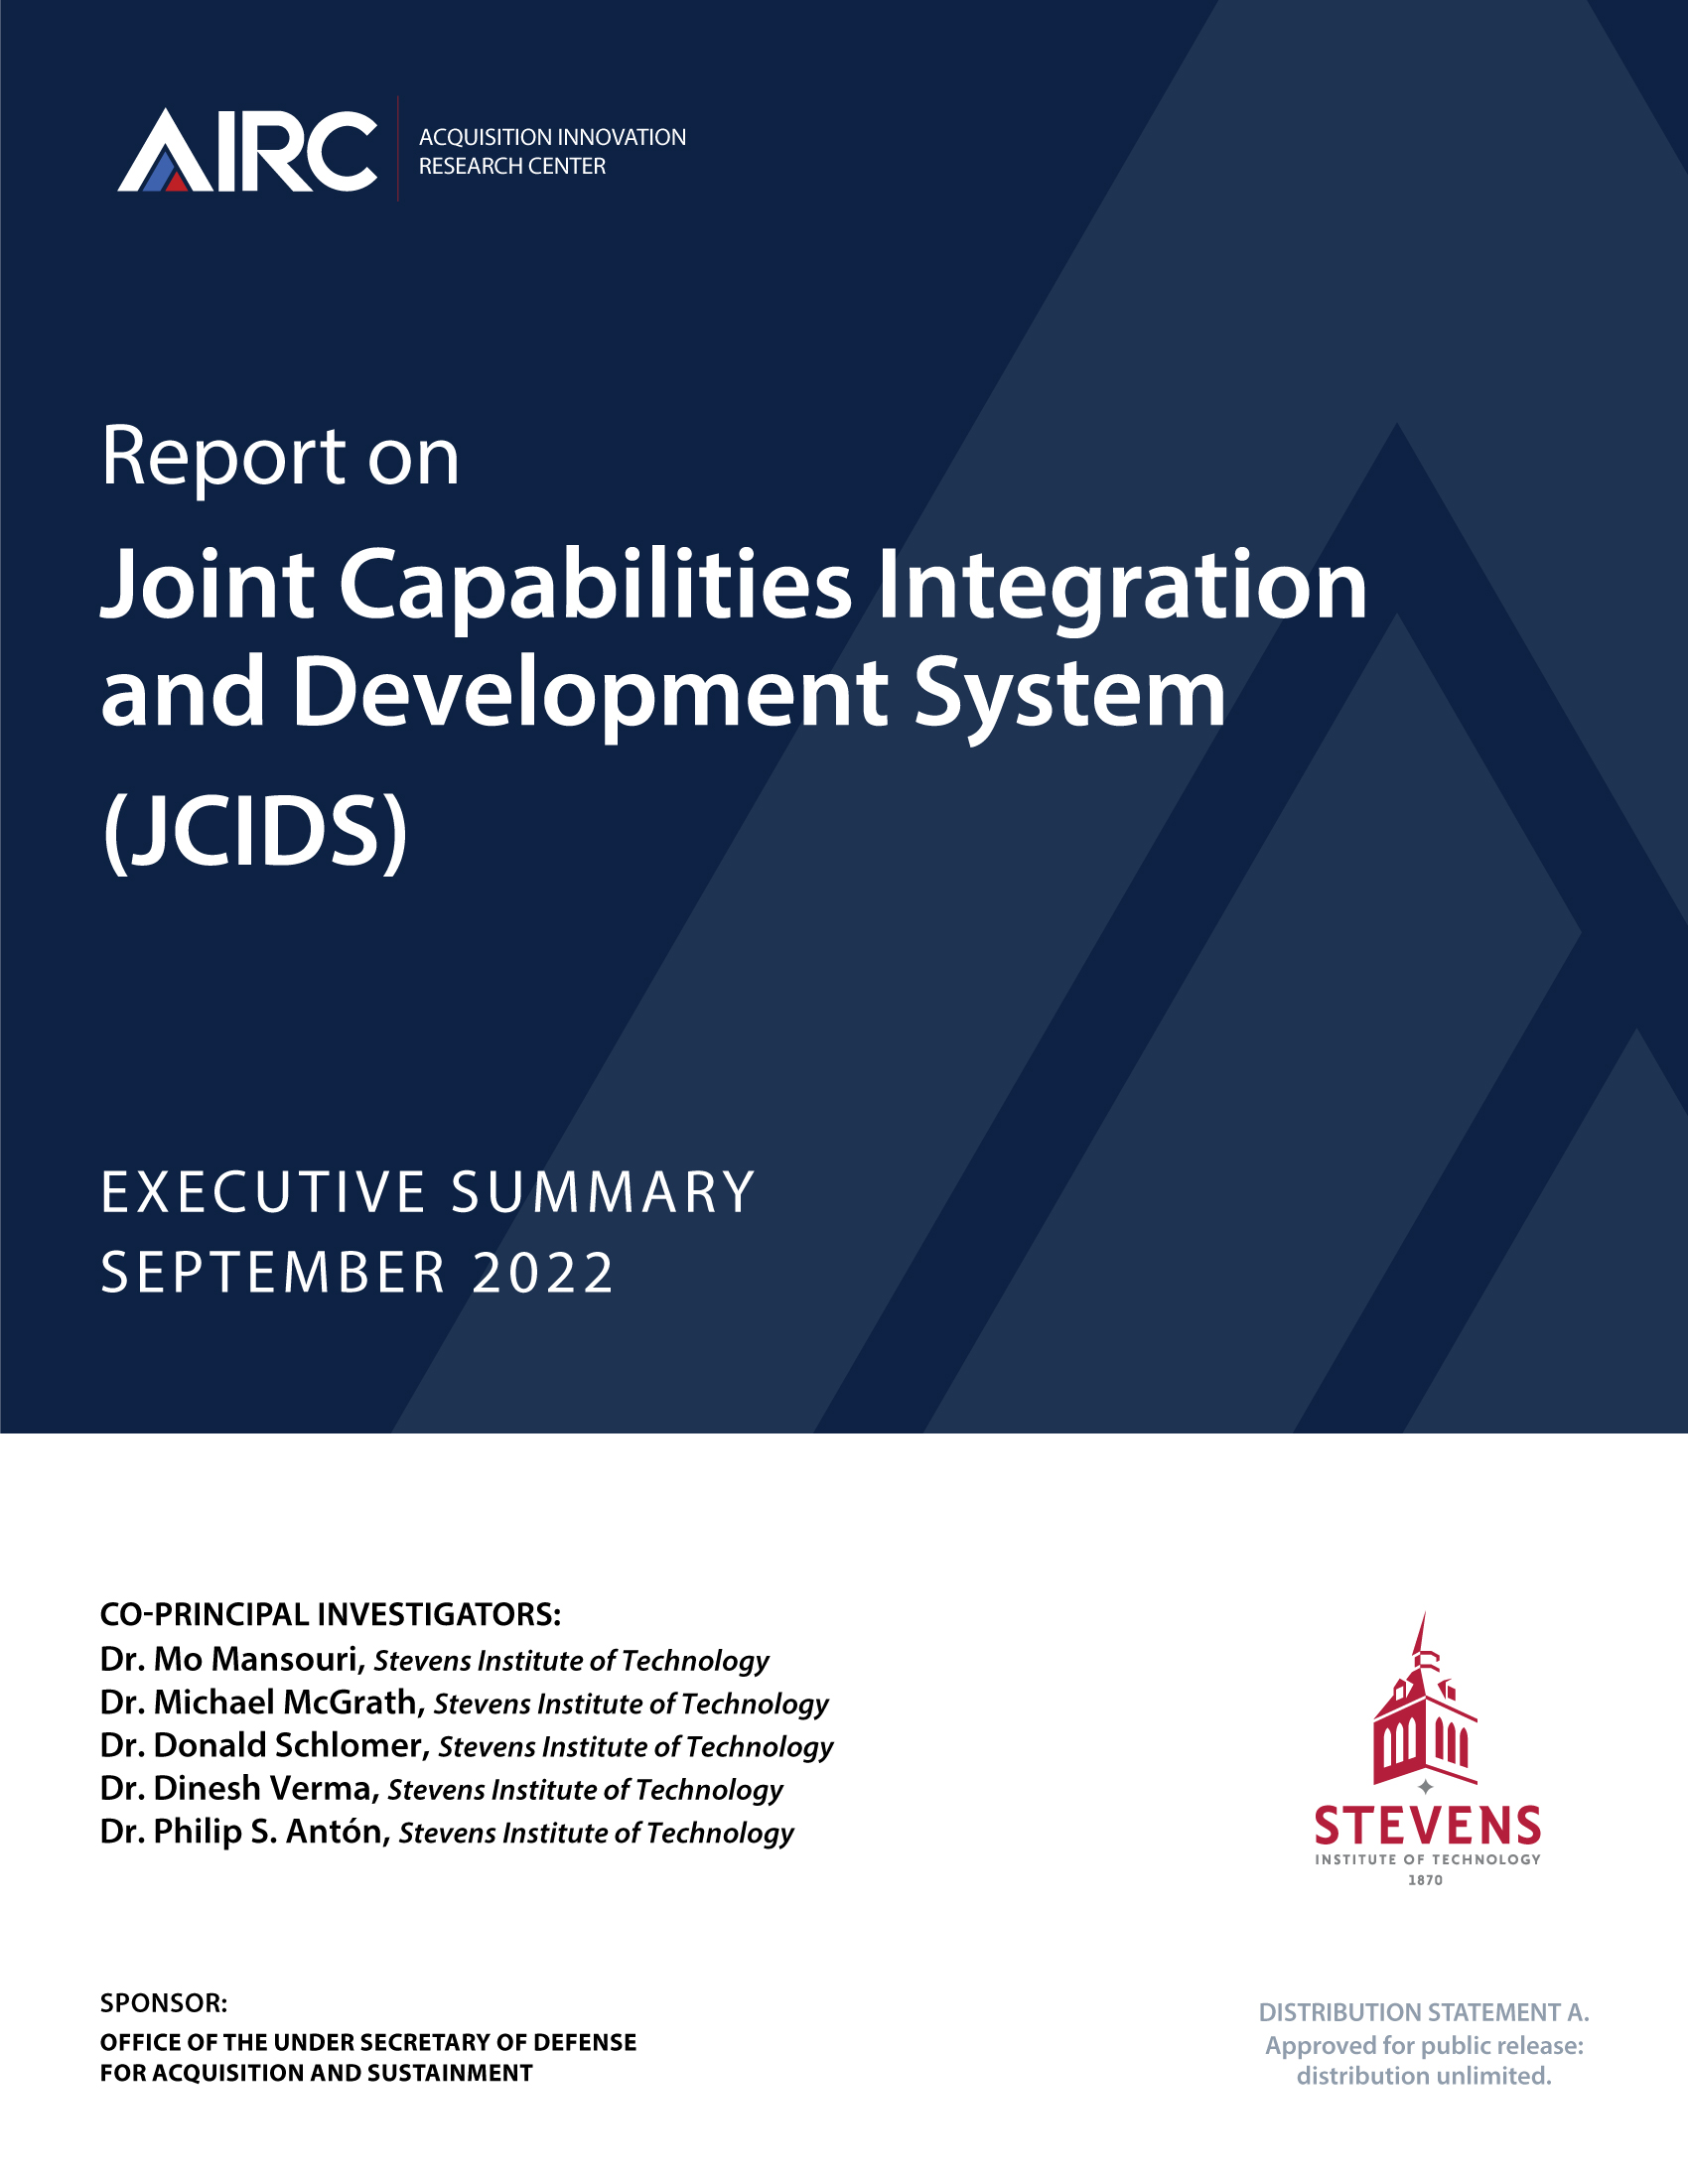 Joint Capabilities Integration and Development System (JCIDS